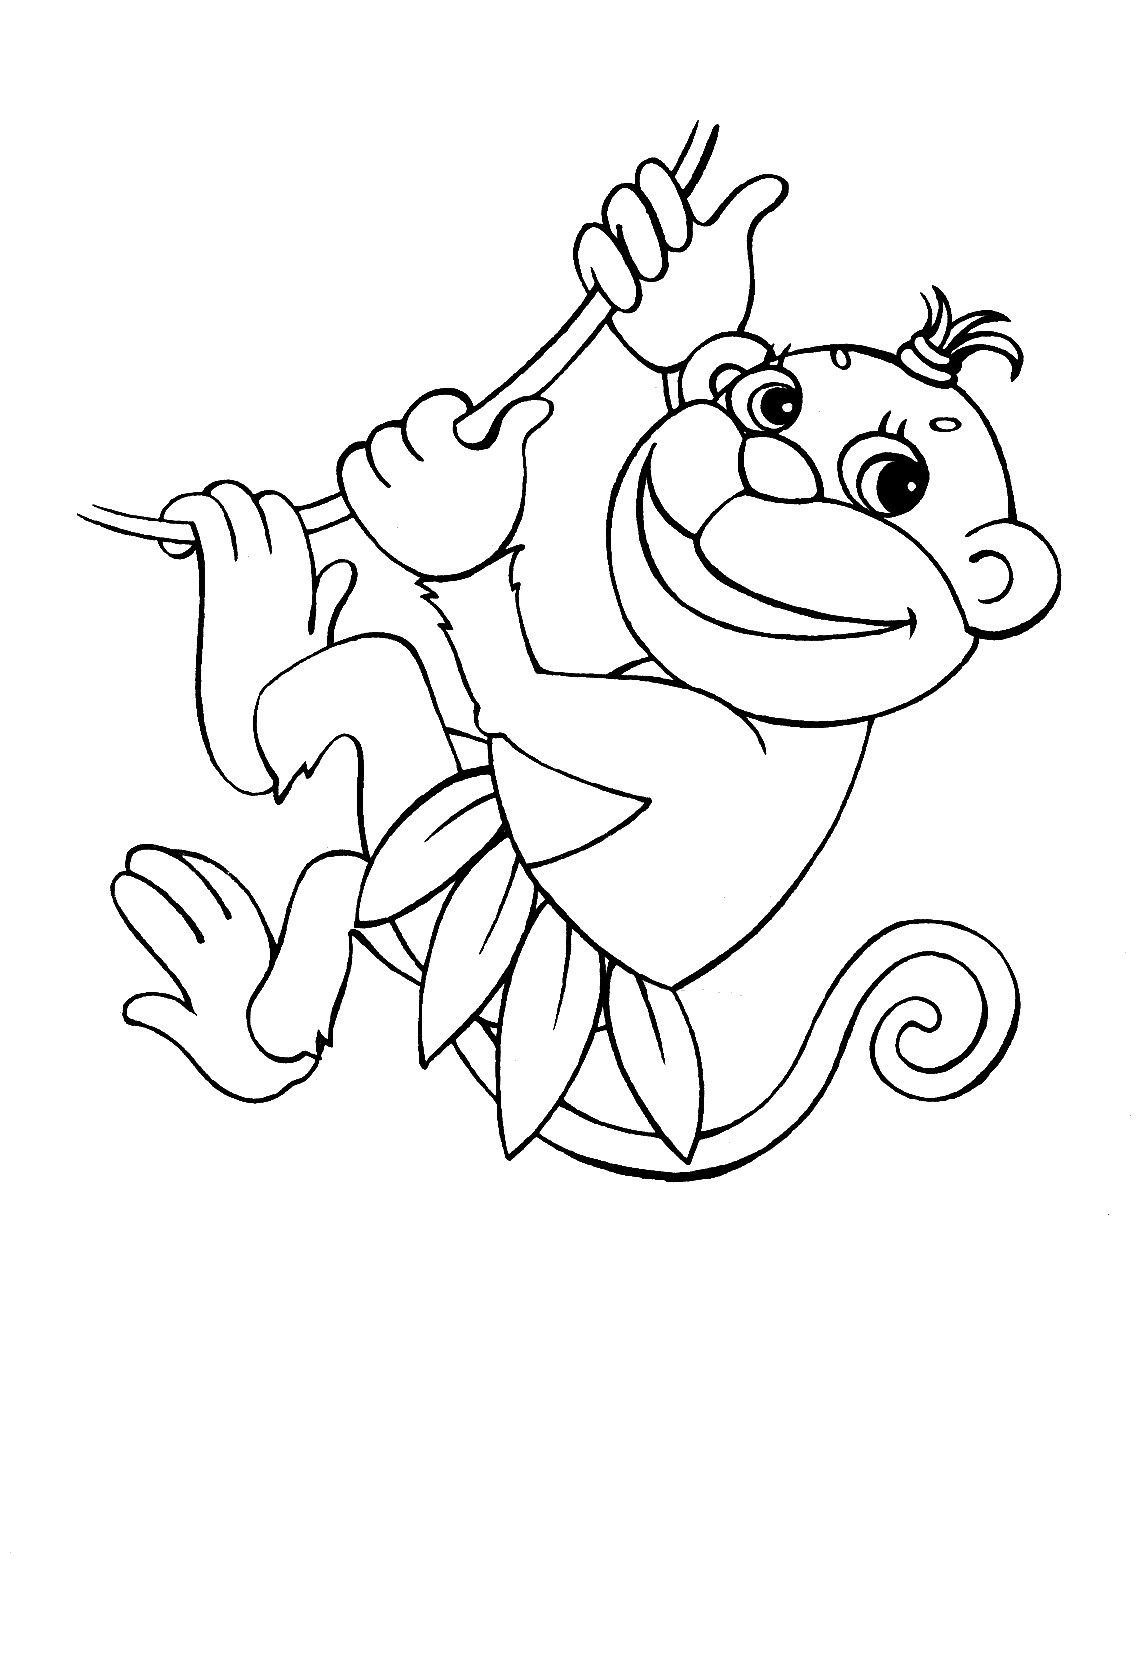 Baby Monkey Coloring Pages
 Free Printable Monkey Coloring Pages For Kids